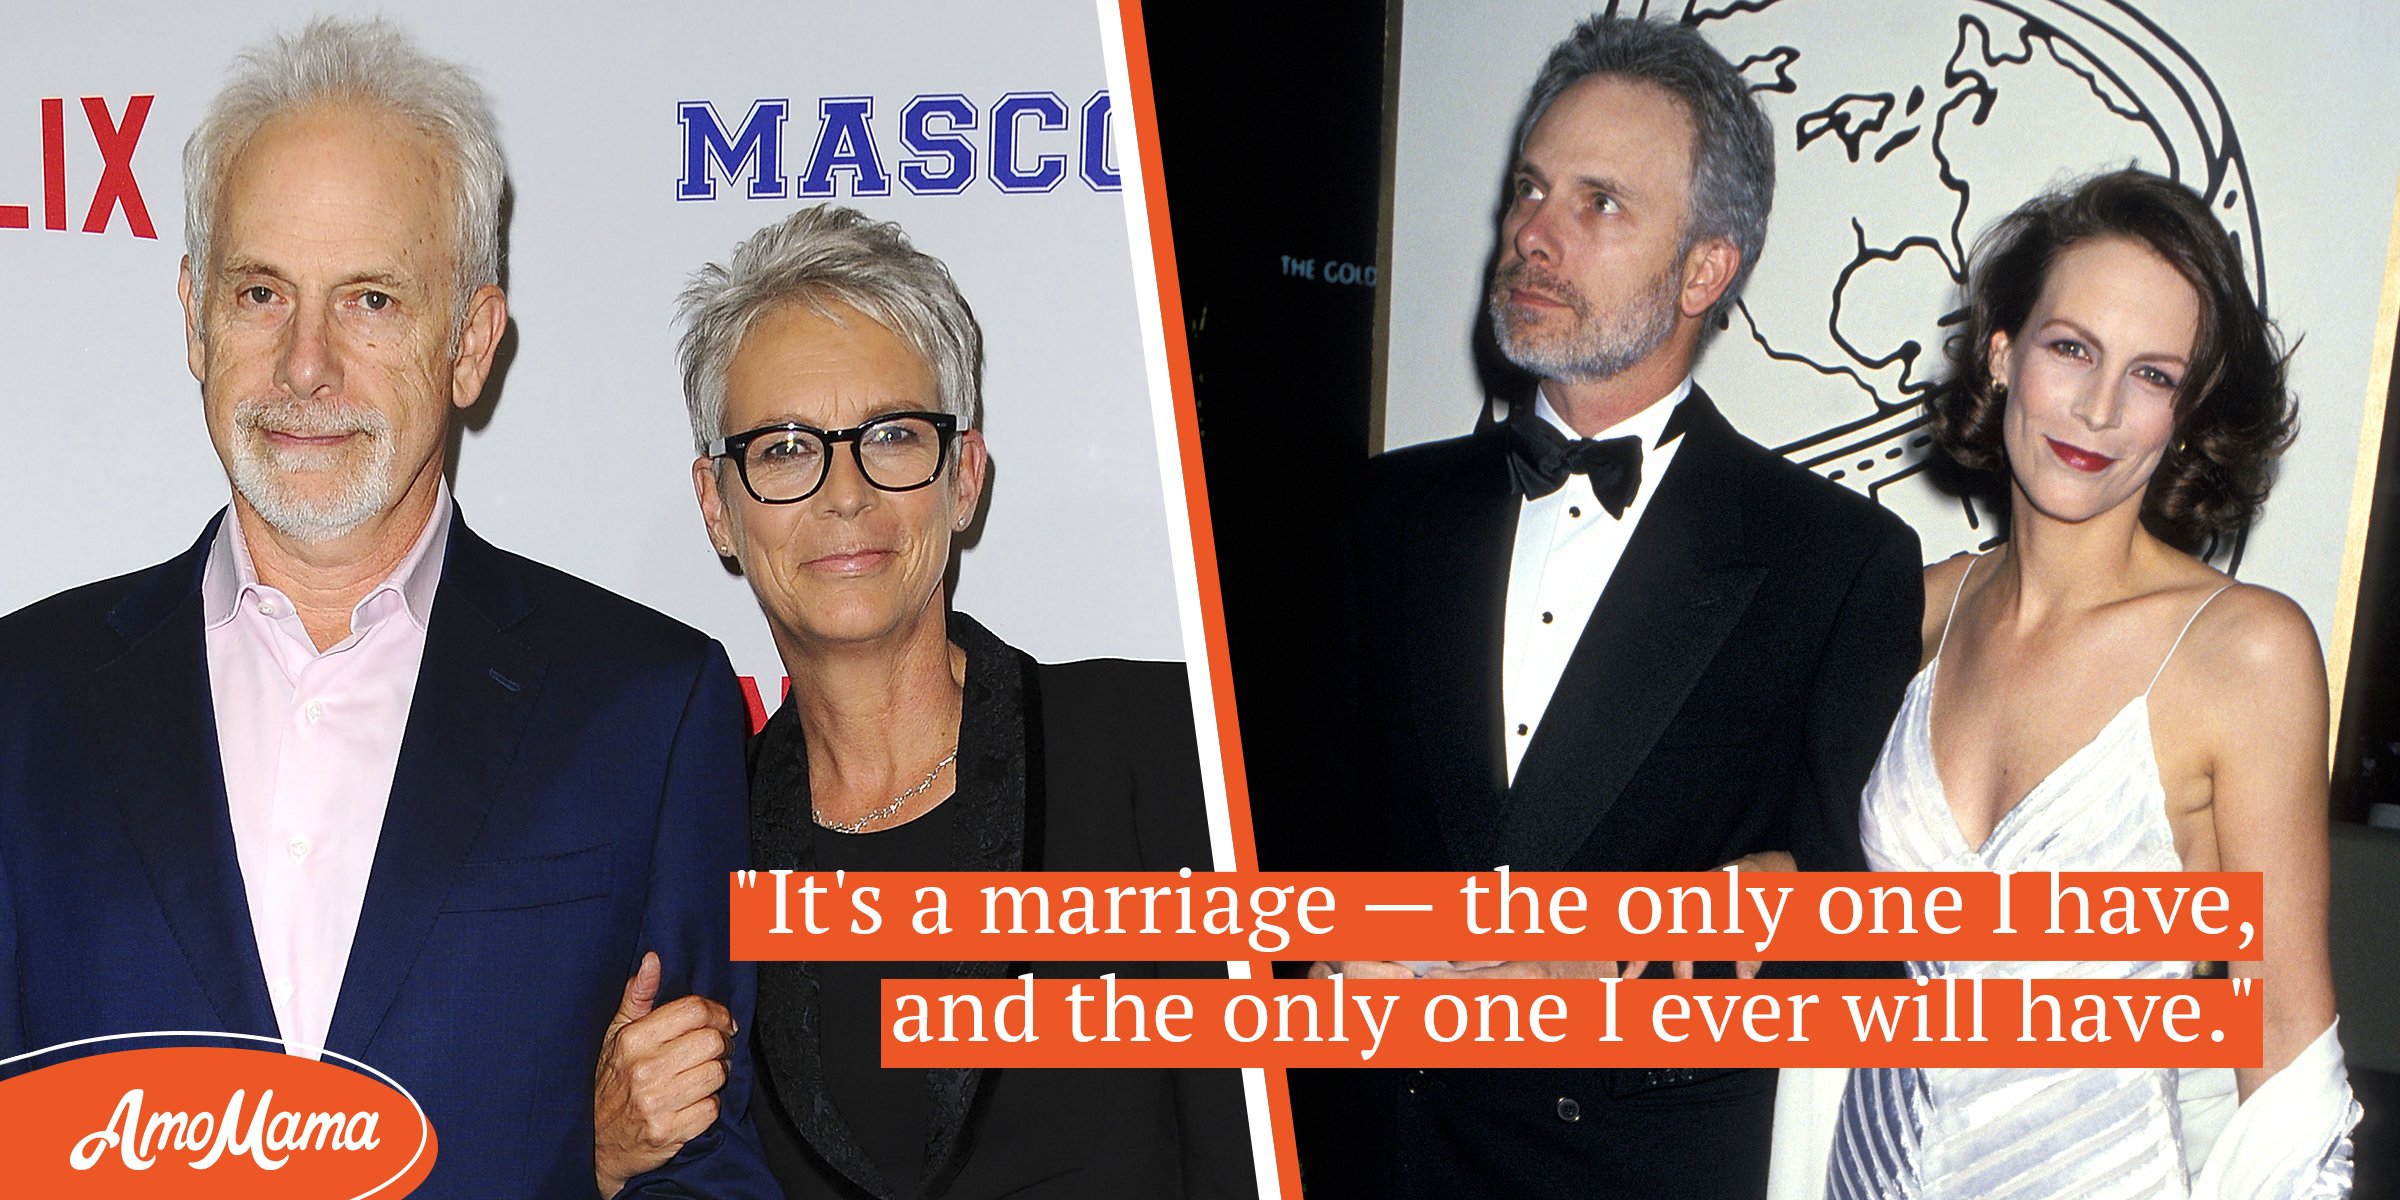 Jamie Lee Curtis Turns 64 — She Has Been with Beloved Spouse for 37 Years &  They Raised 2 Adopted Daughters